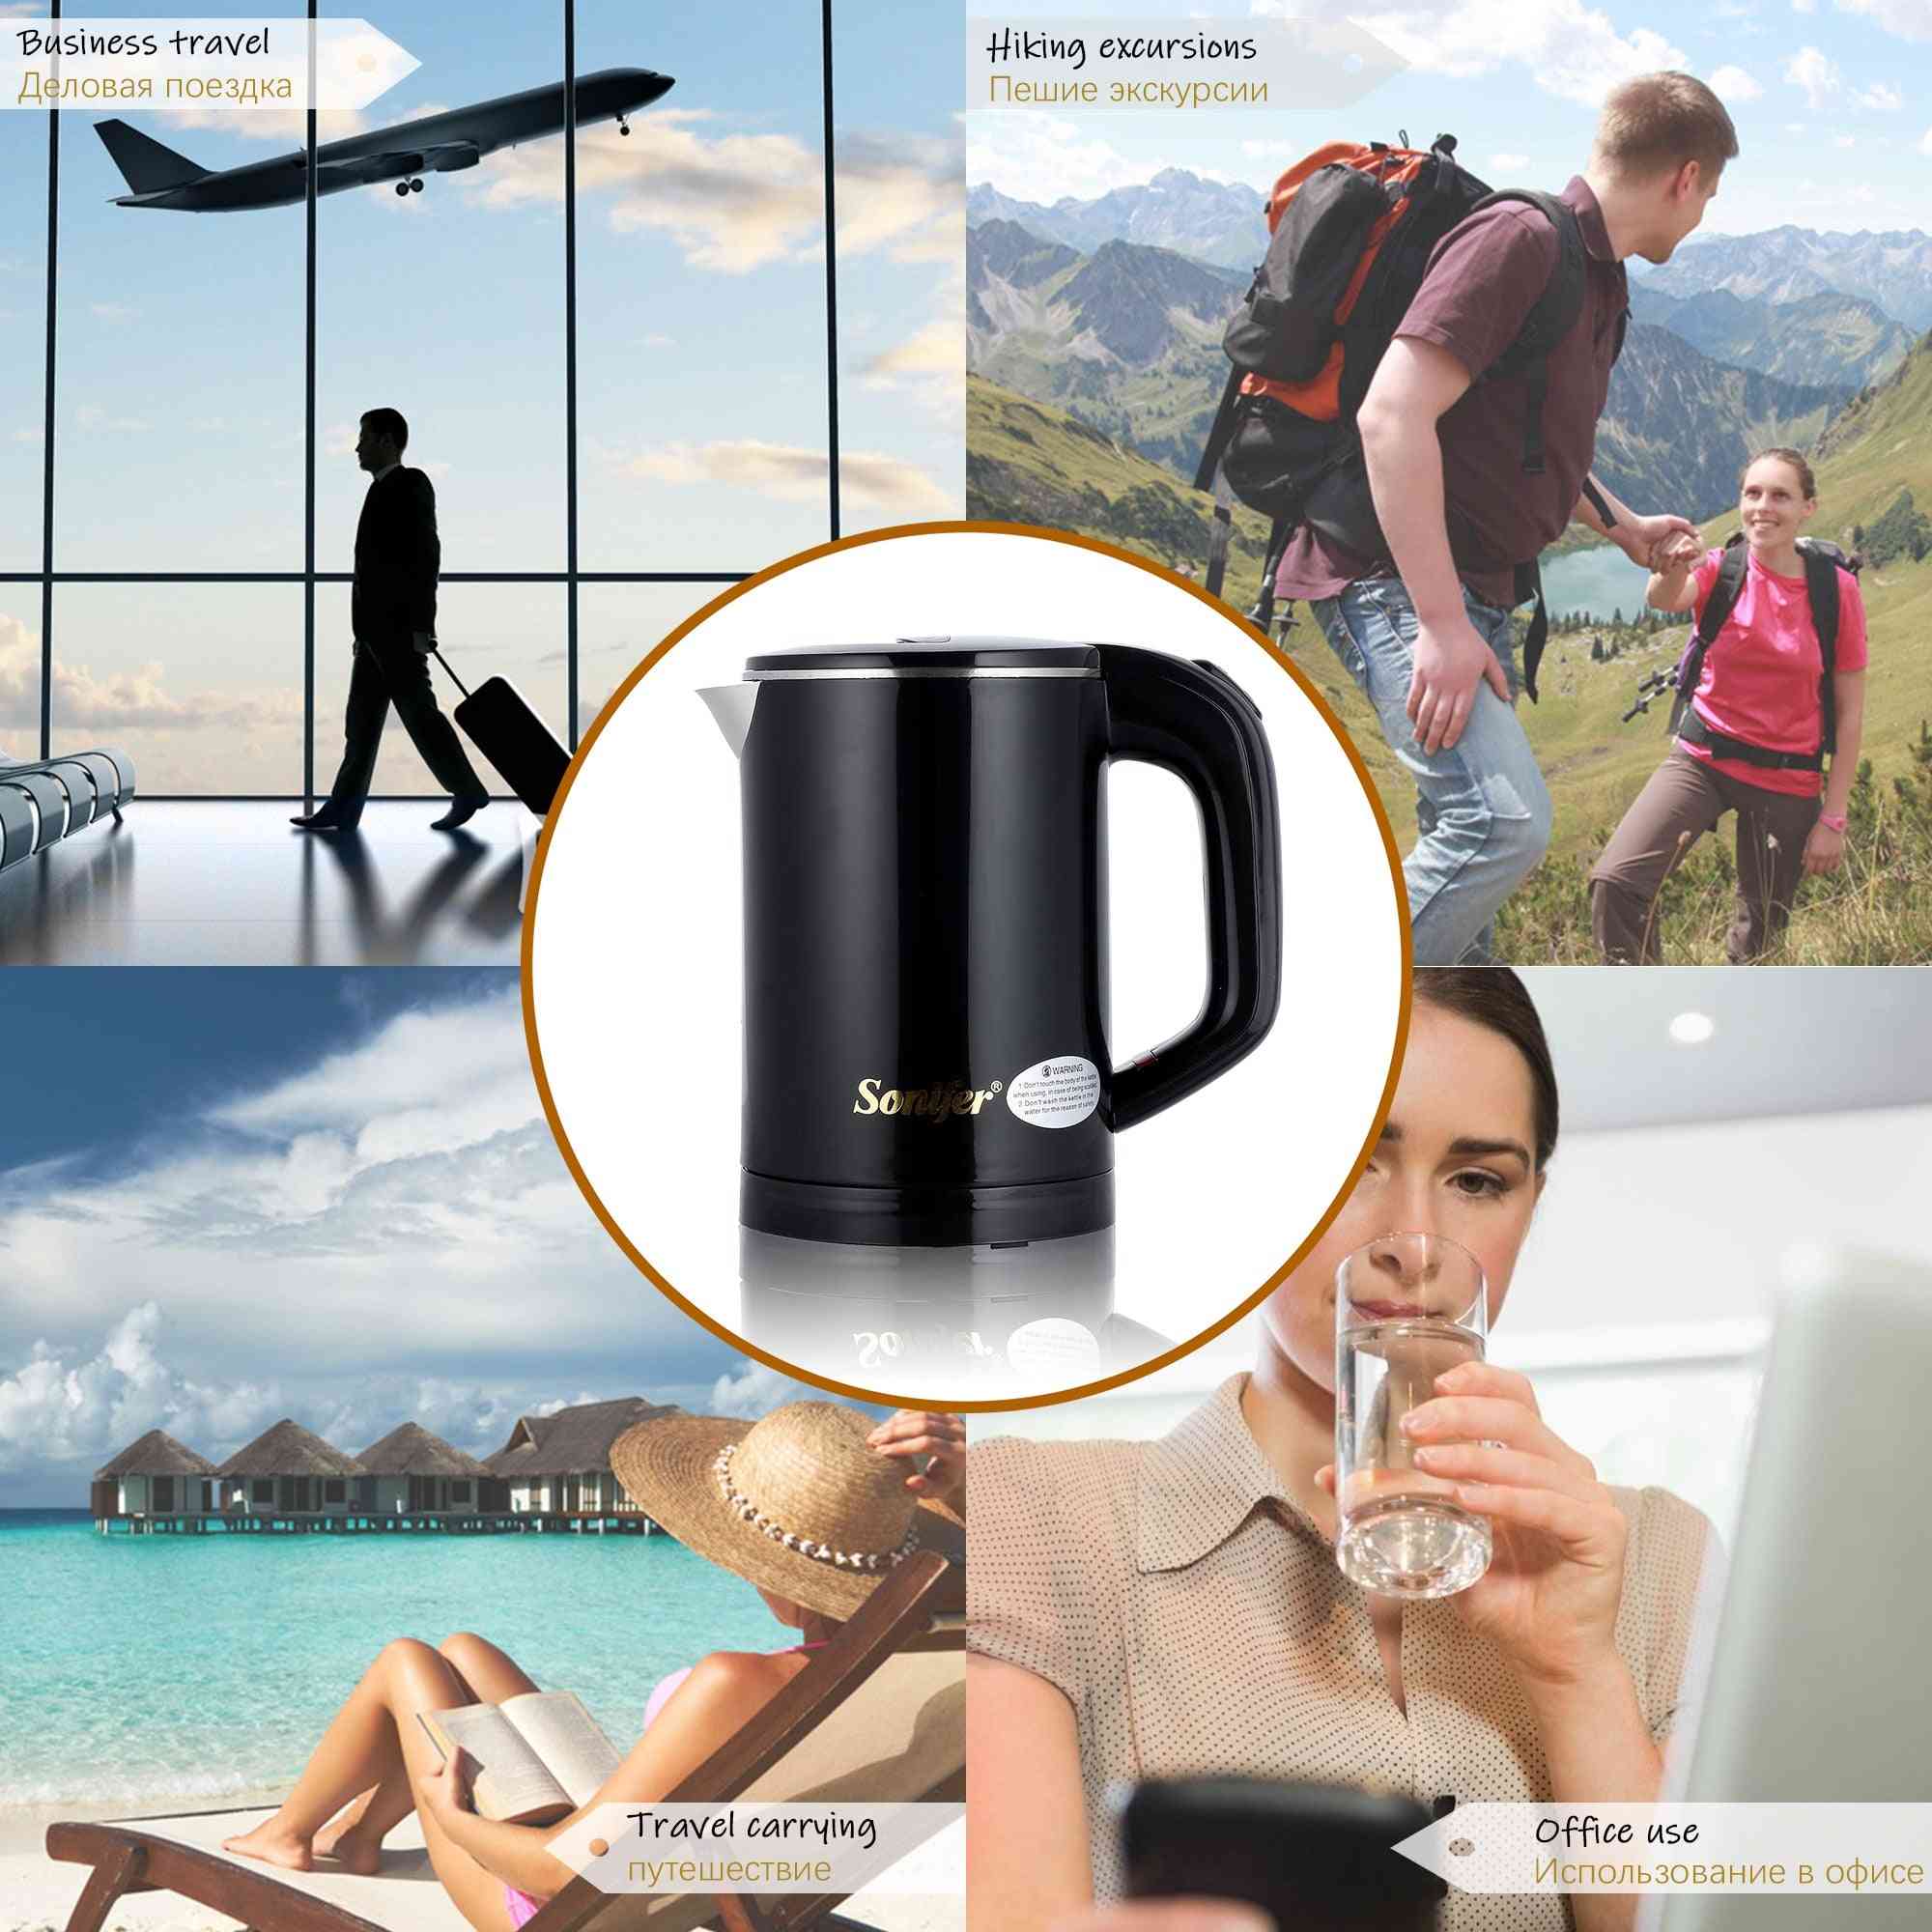 Mini Travel Electric, Stainless Steel, Cordless Kettle For Heating Water, Teapot